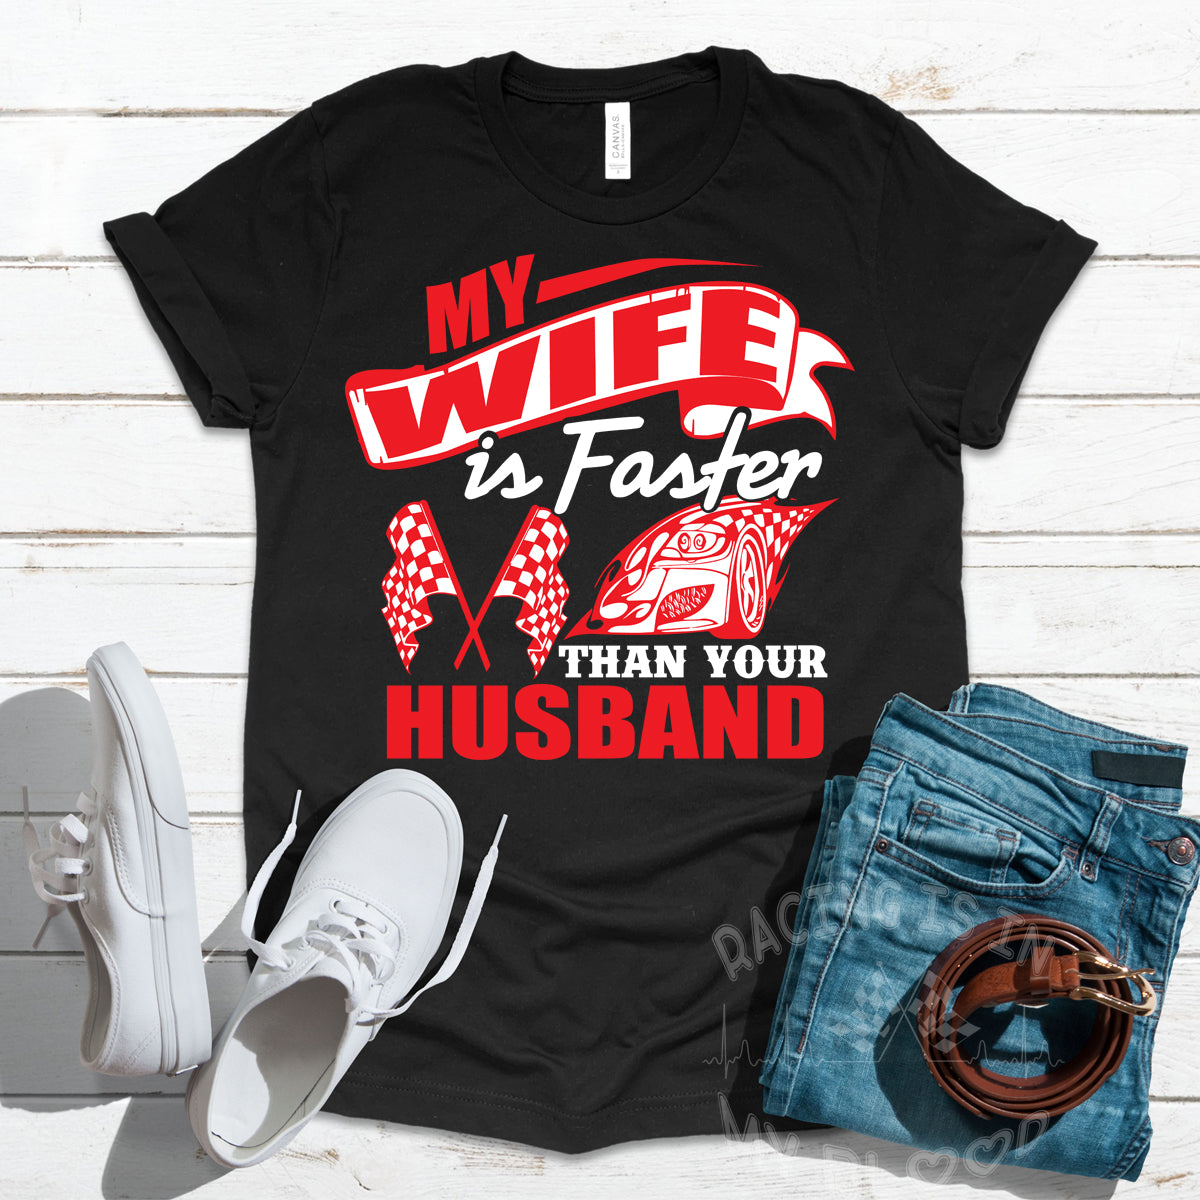 My Wife Is Faster Than Your Husband T-Shirts!